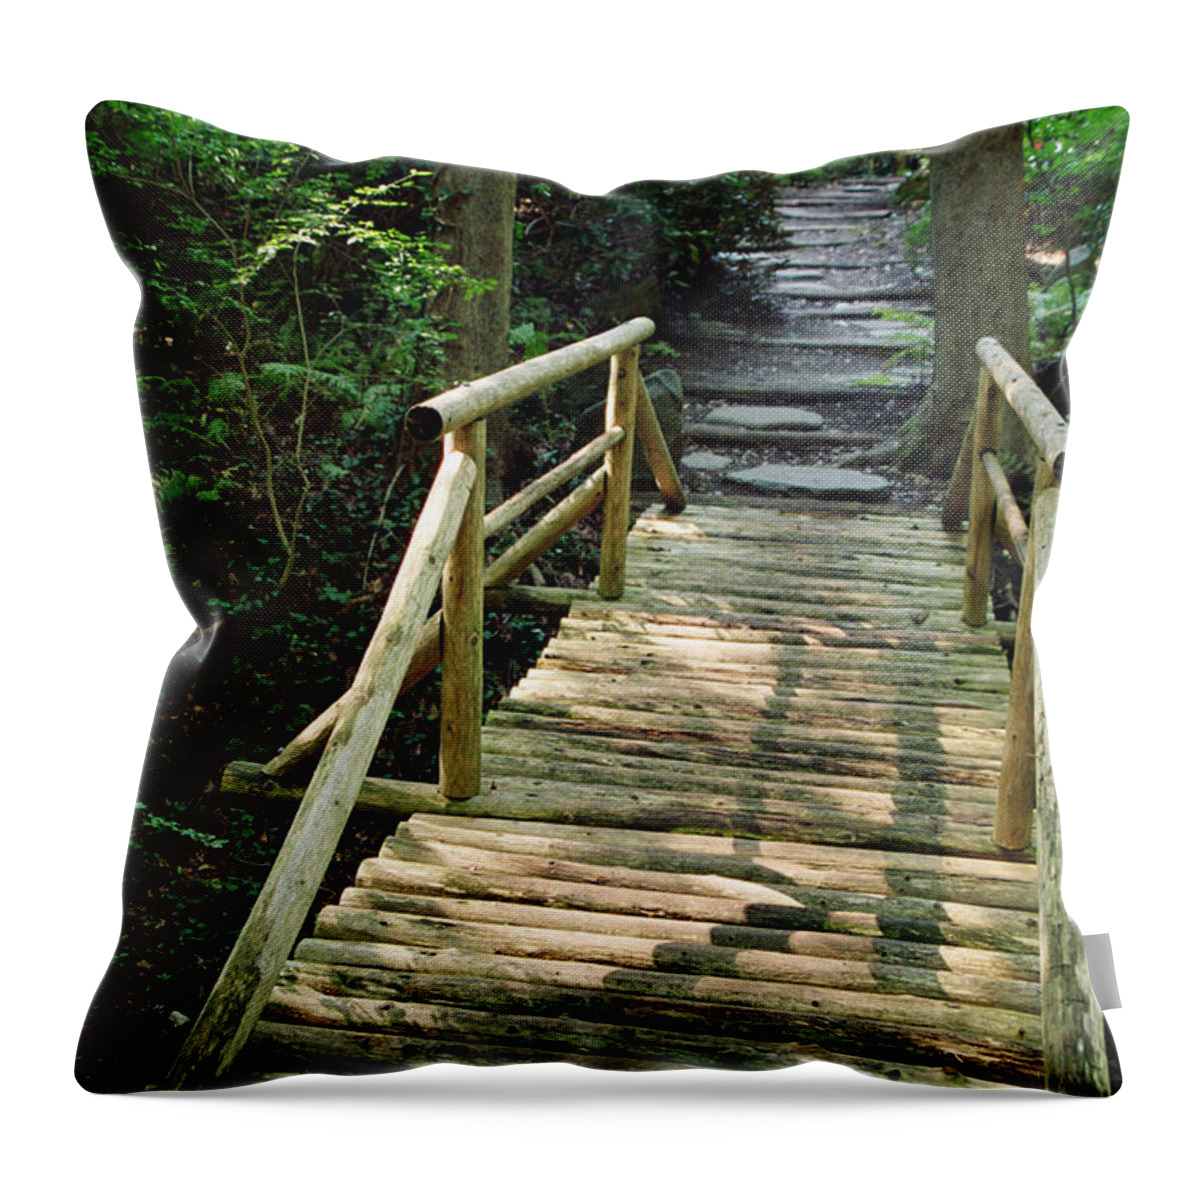 Landscape Throw Pillow featuring the photograph Dnrs1019 by Henry Butz